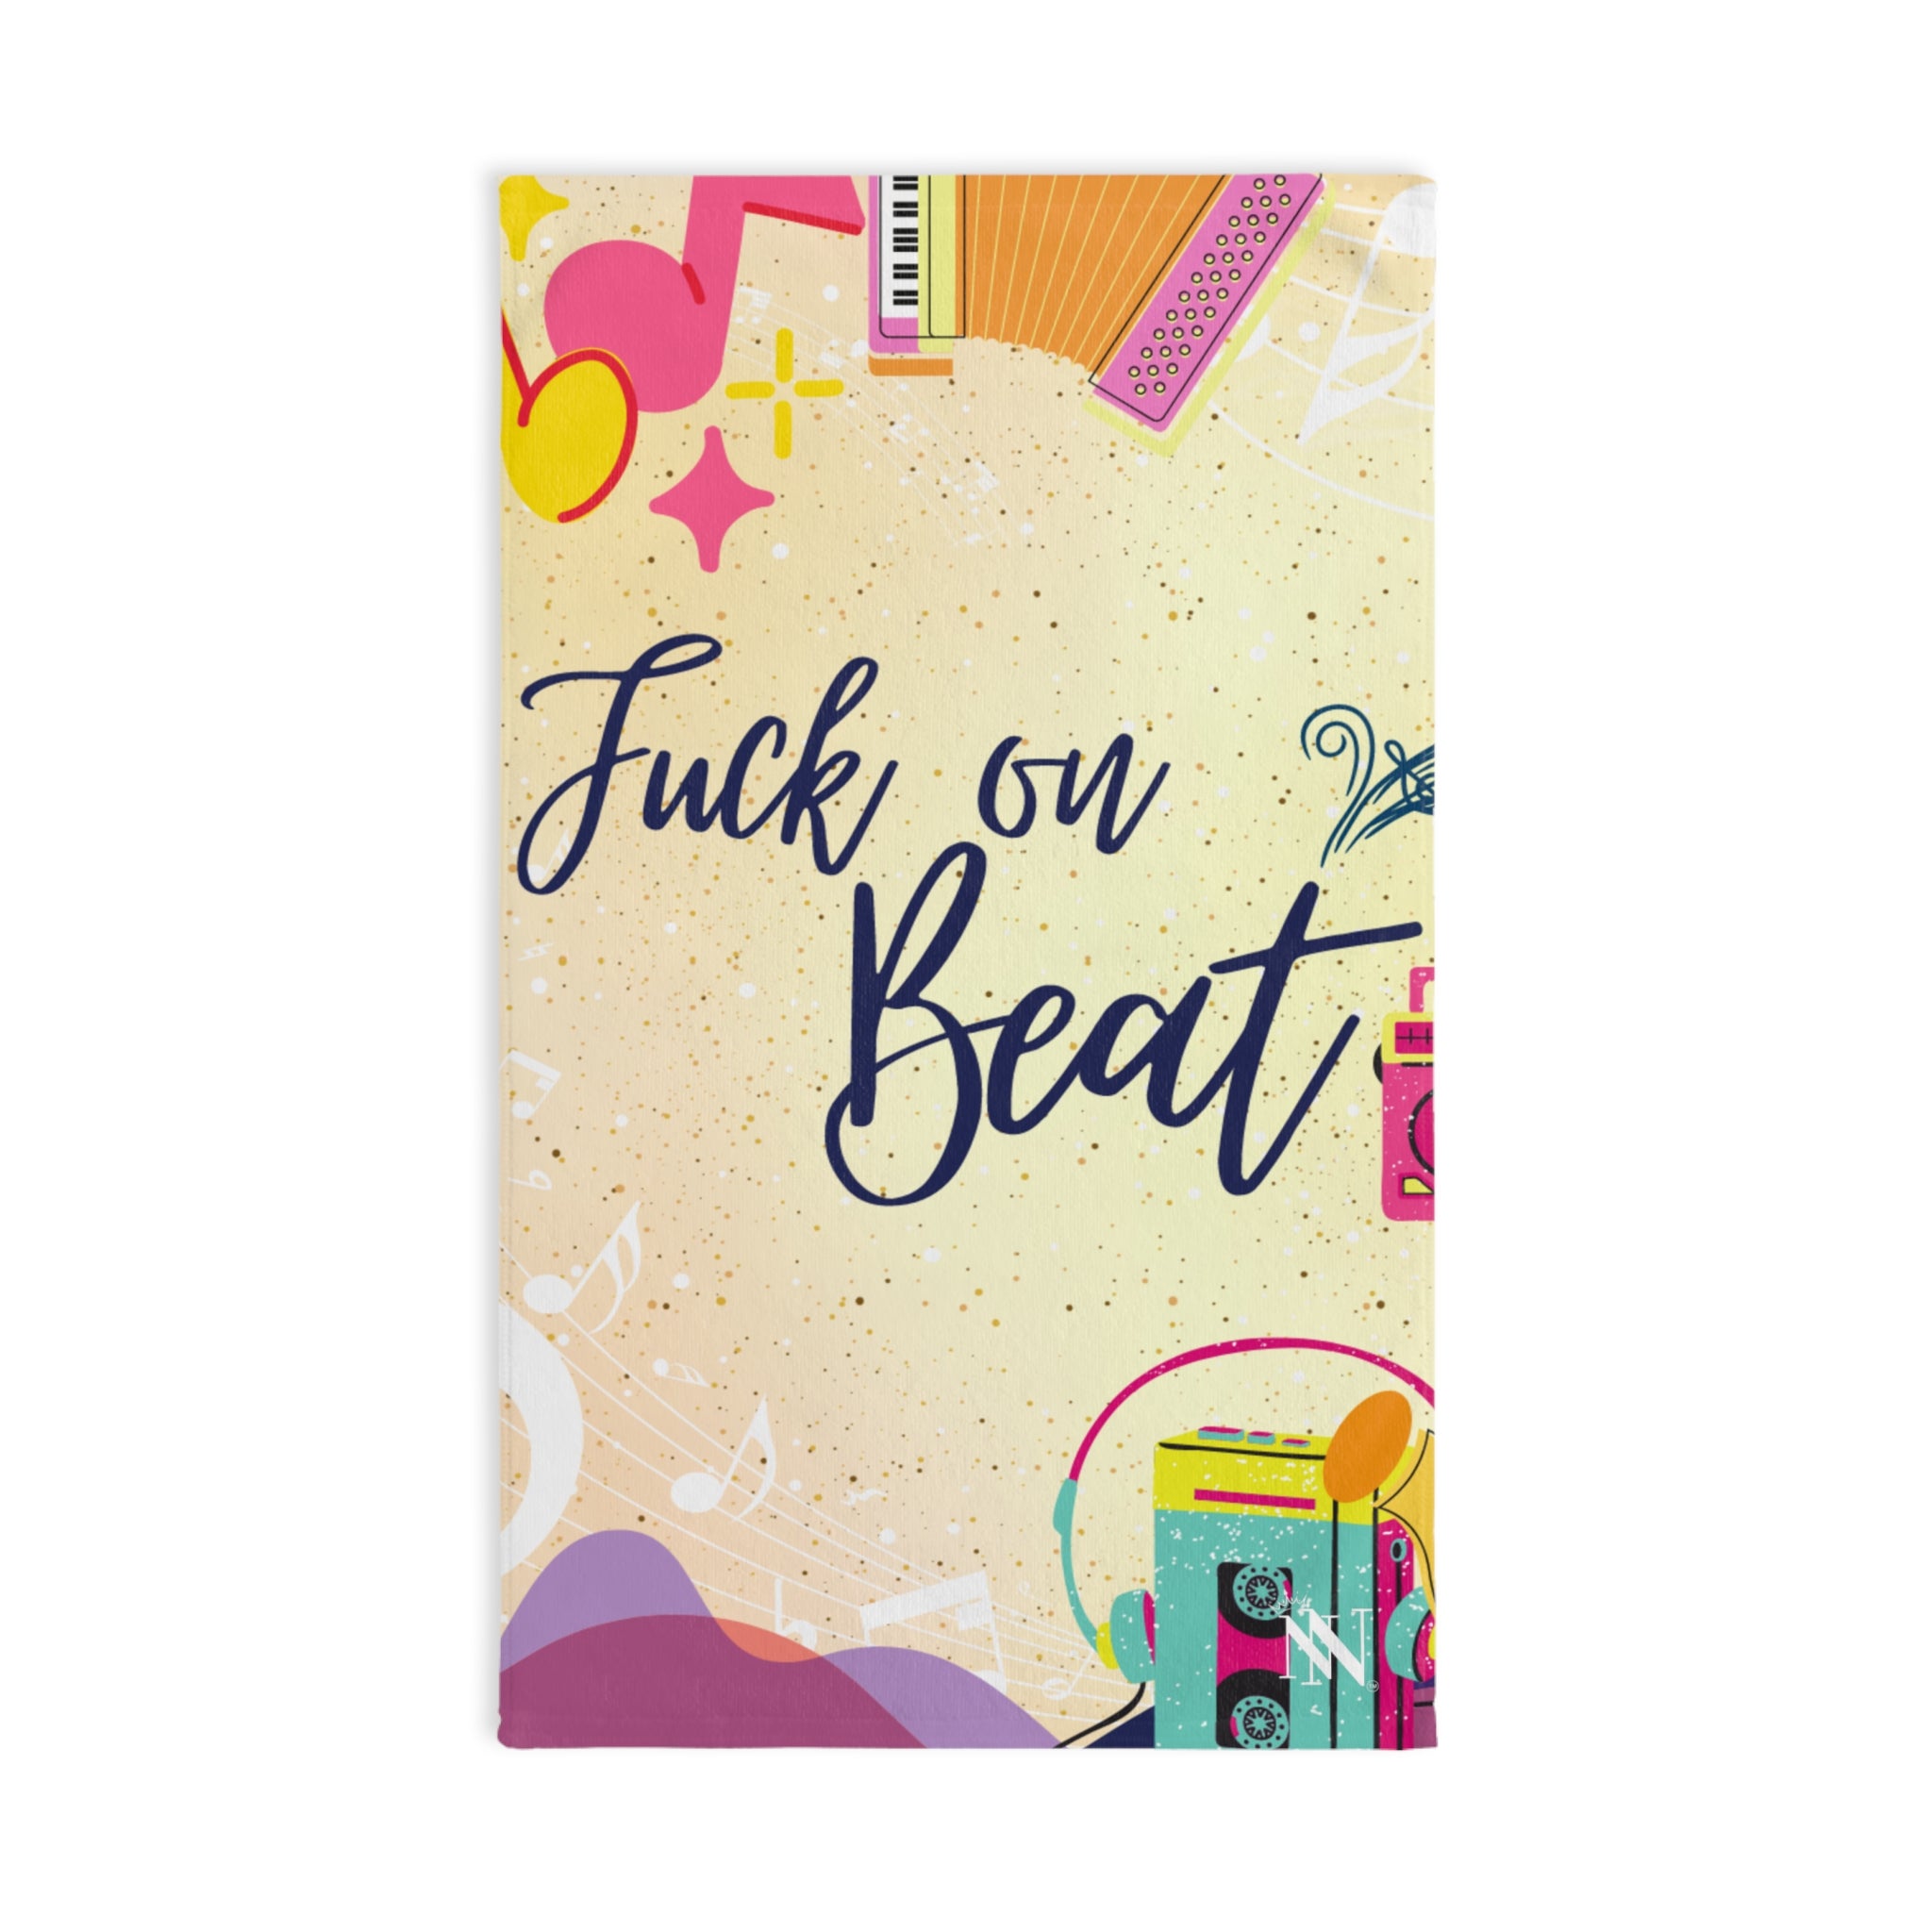 Fuck on Beat Sex Towels 